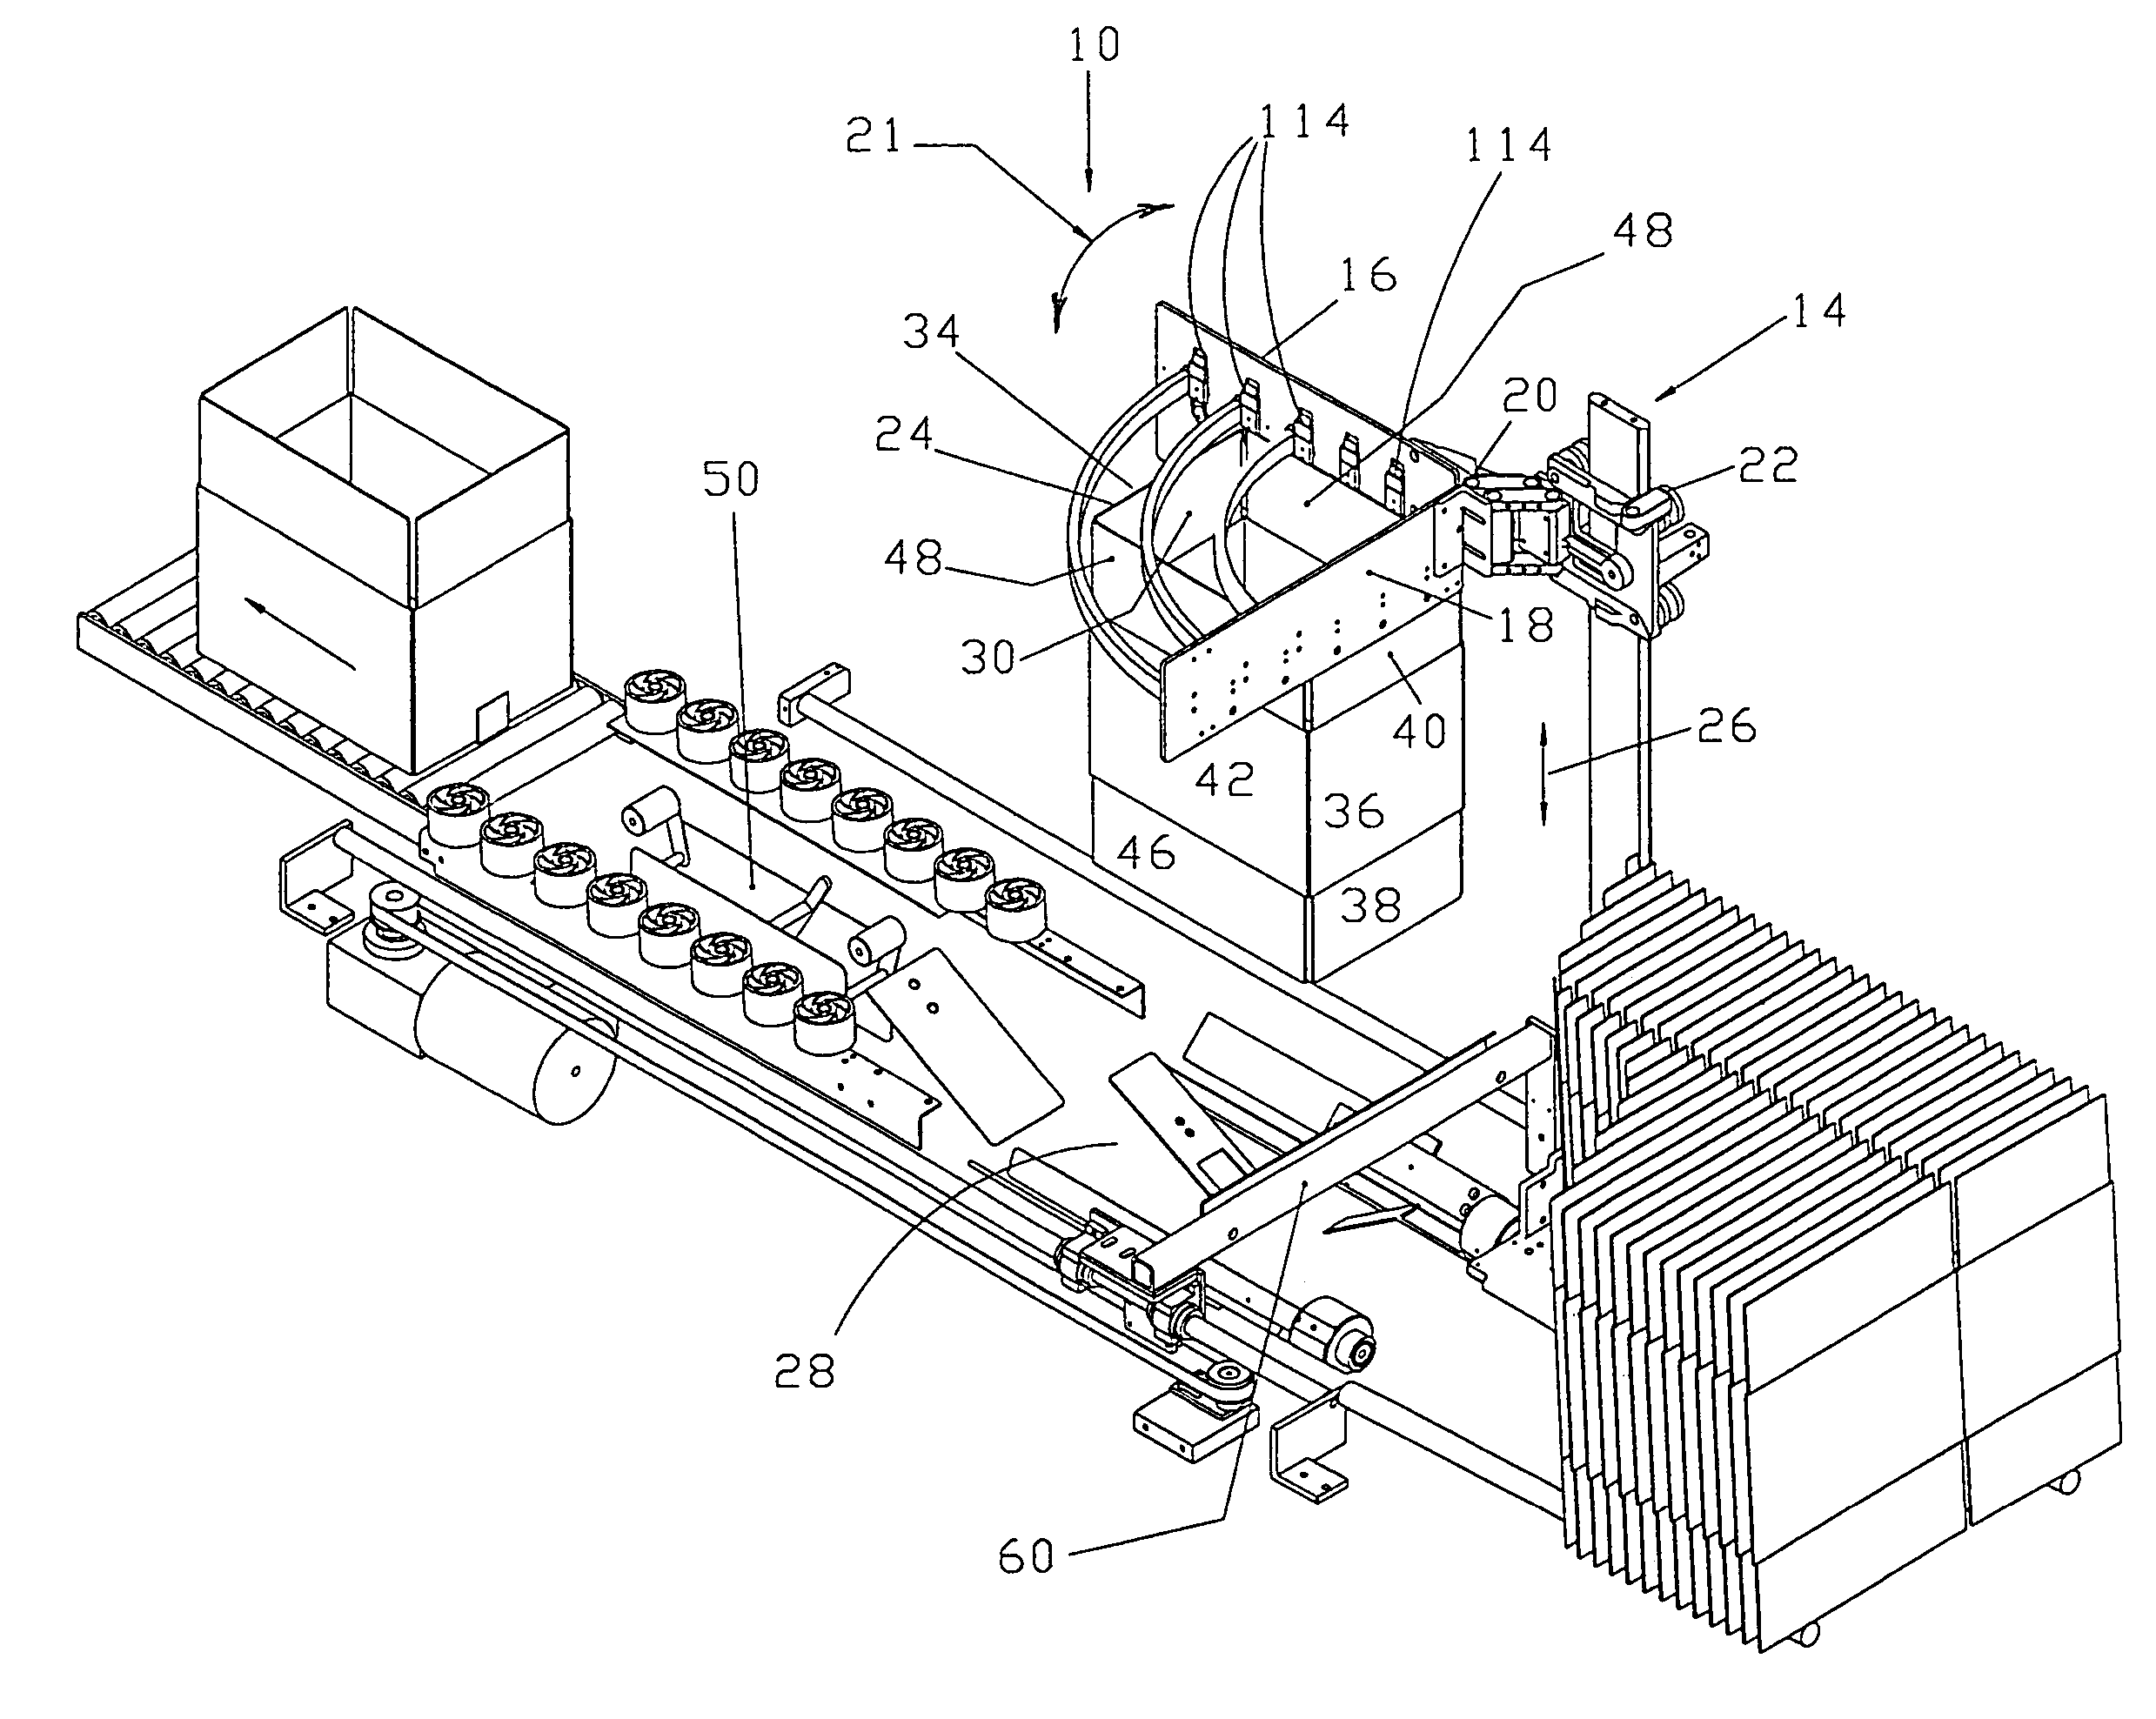 Thickness adjustment and stabilizer bar system for a case erector